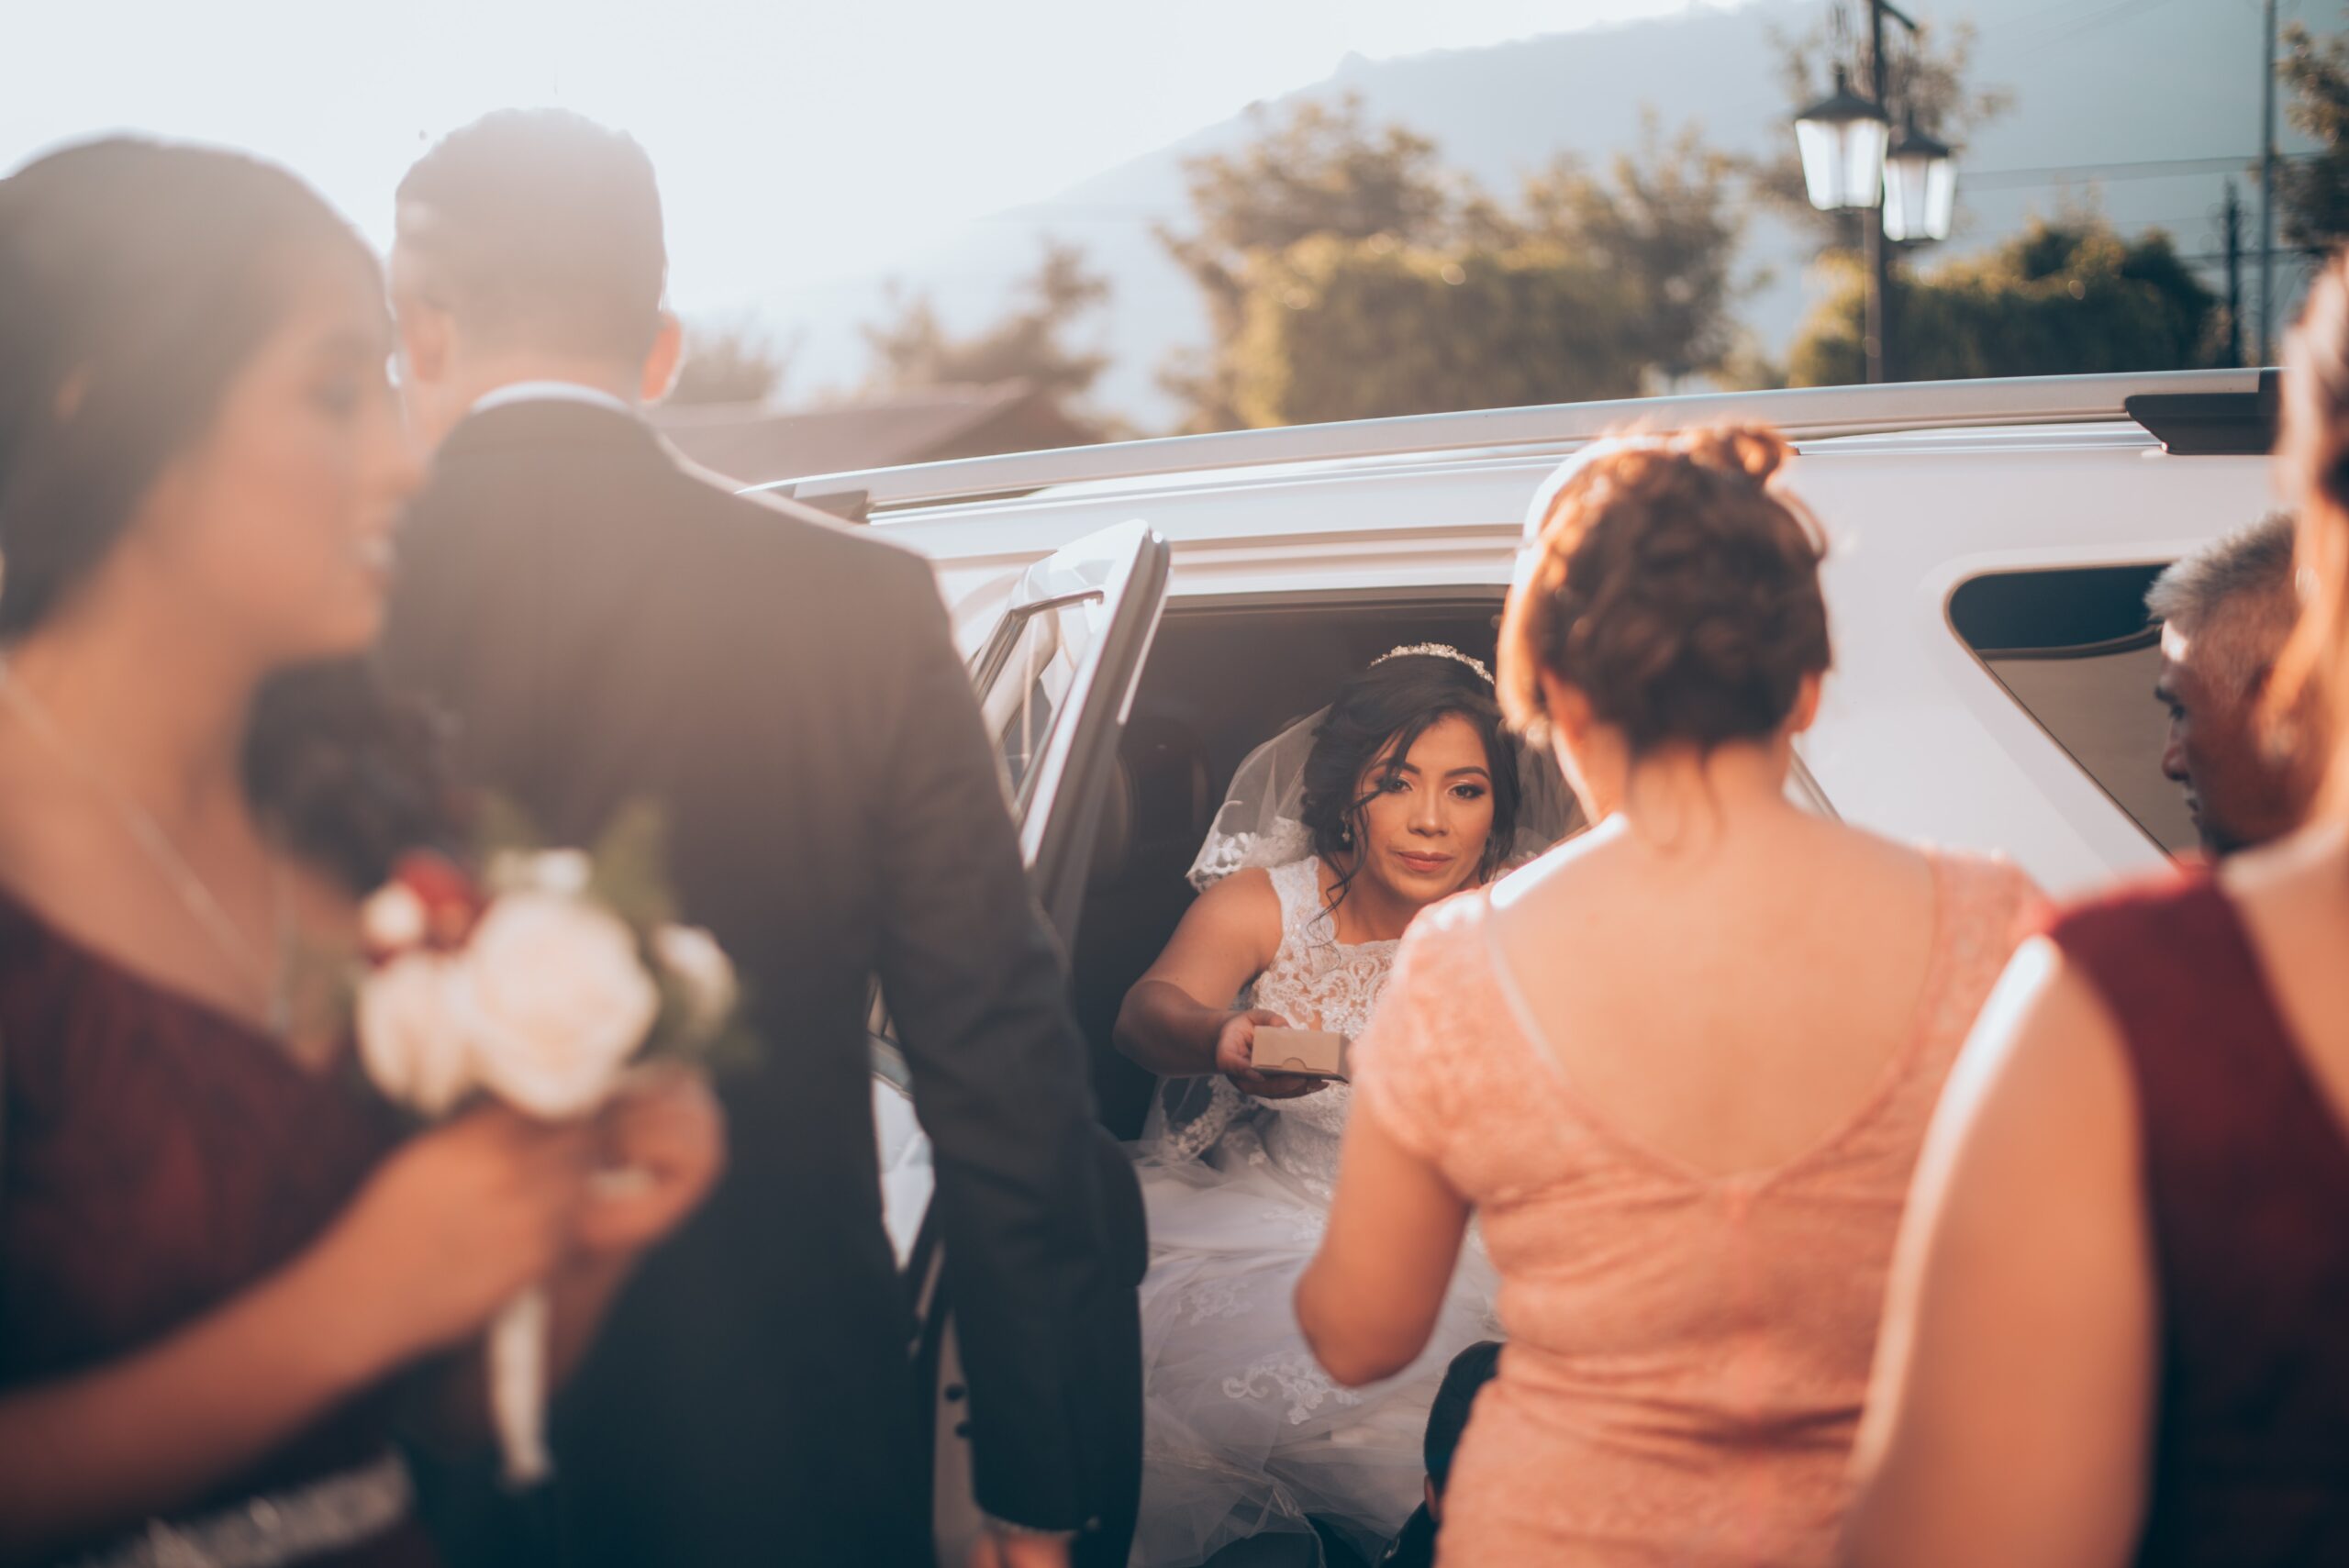 Why You Need a Wedding Limousine